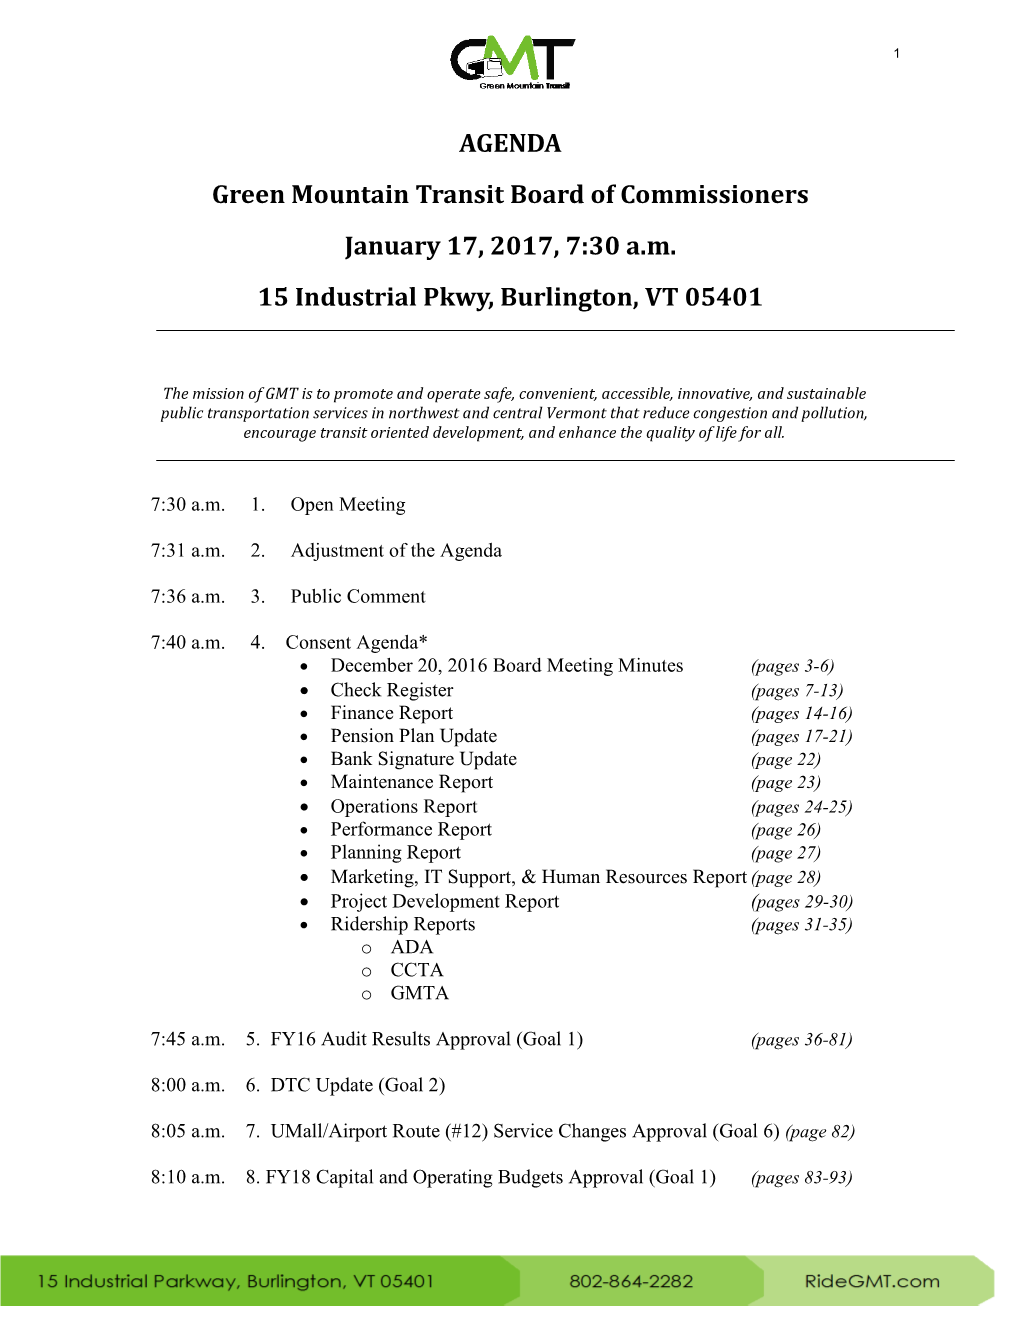 AGENDA Green Mountain Transit Board of Commissioners January 17, 2017, 7:30 A.M